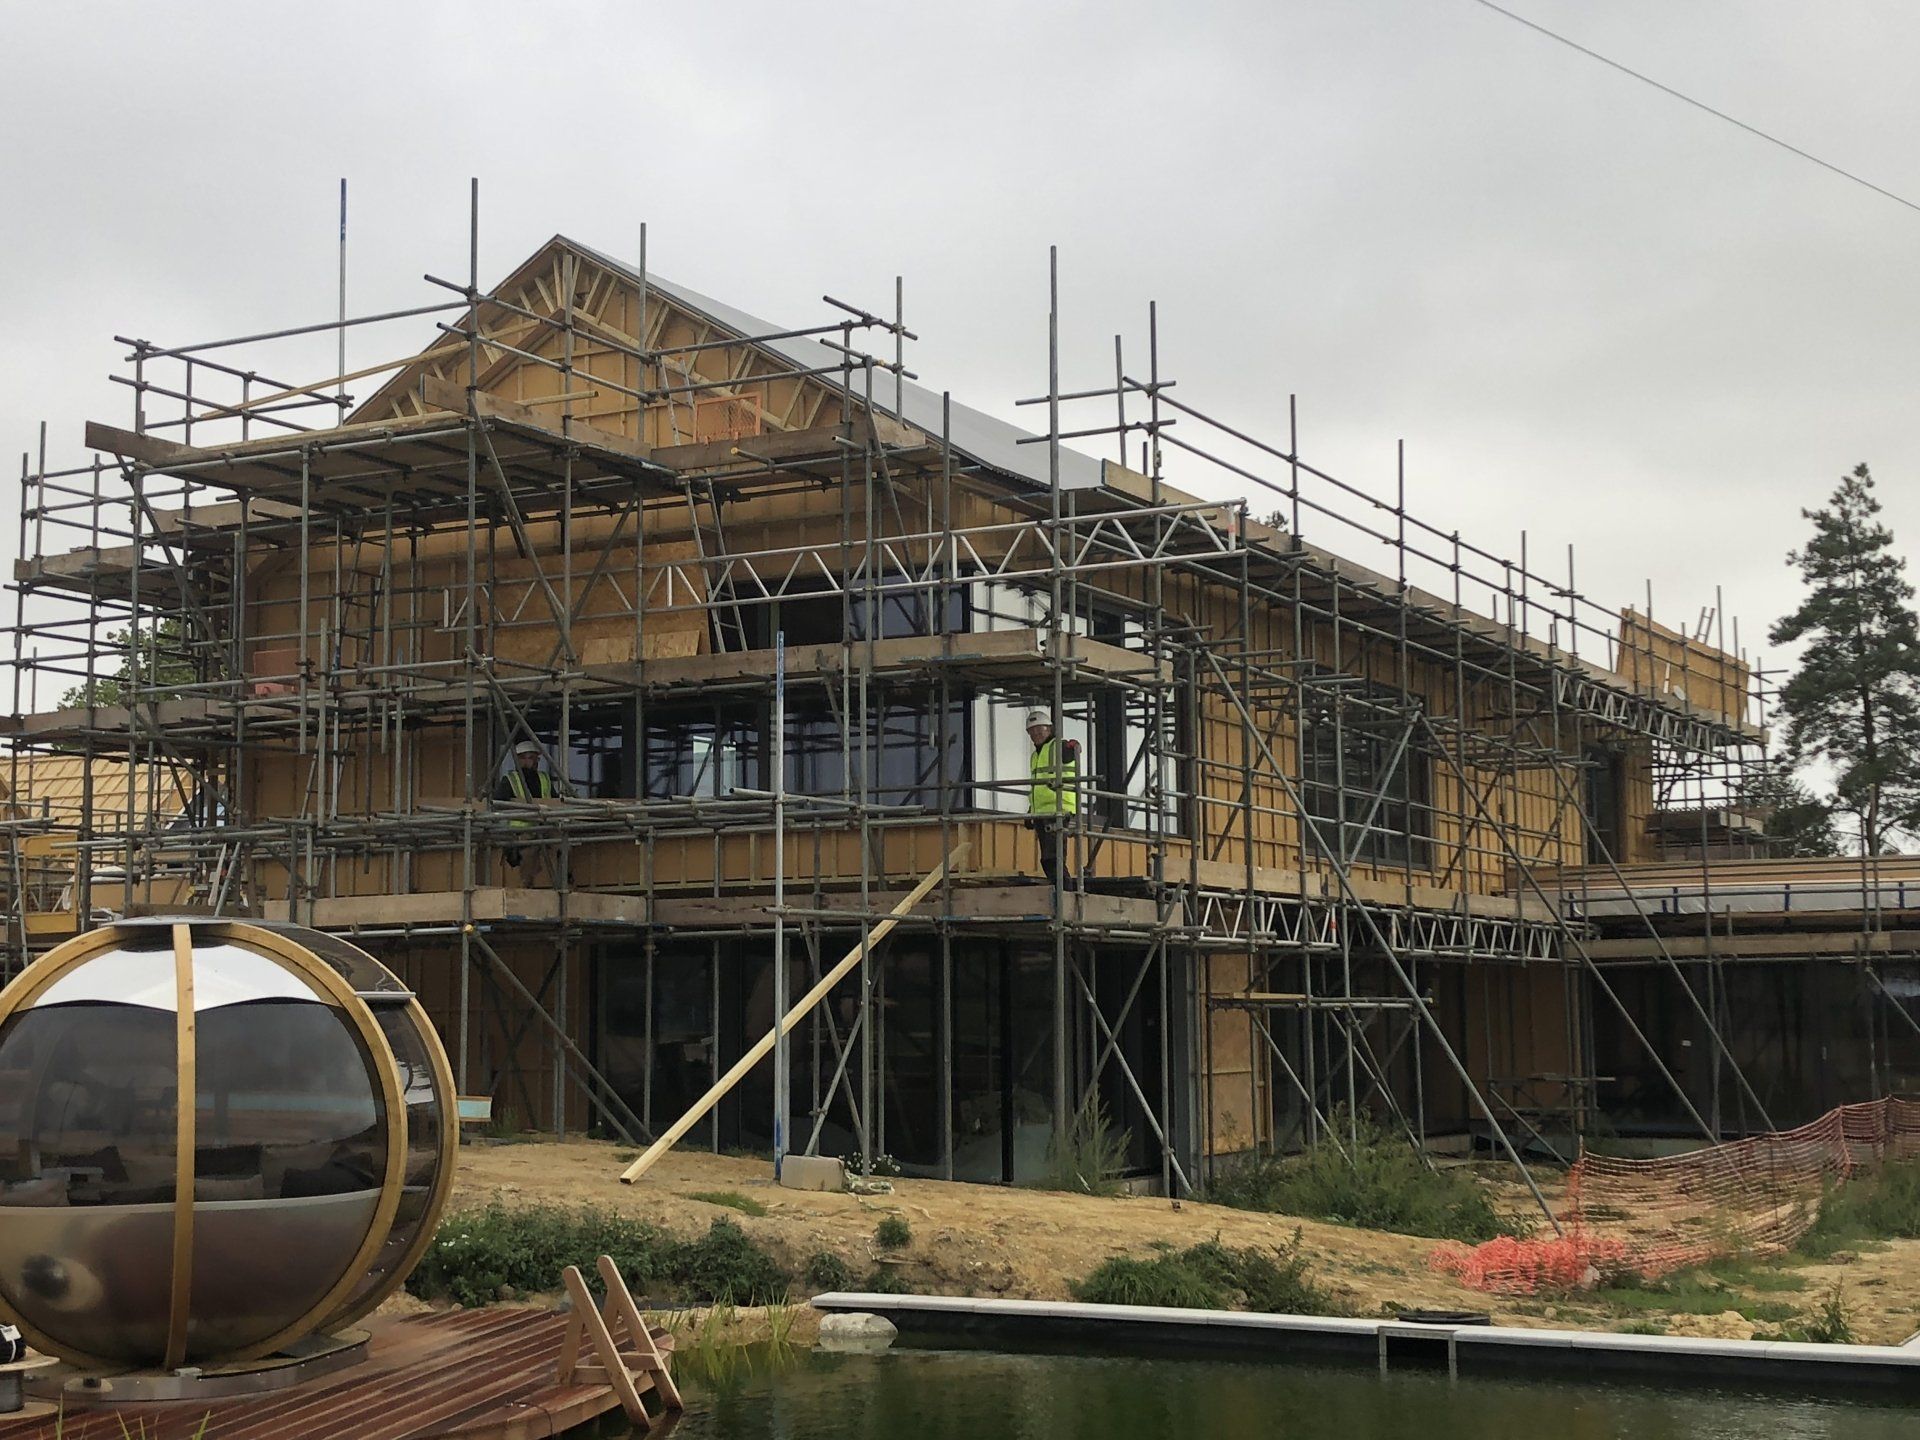 Lingfield Construction. Timber Frame. Builder. Building contractor. Construction. Carpentry. Carpentry contractor. Extensions. New builds. Timber frame fabrication and erection. Design and build. Kitchen installations. Horsham. Surrey. Reigate. Redhill. Dorking. Crawley. West Sussex. Cranleigh.